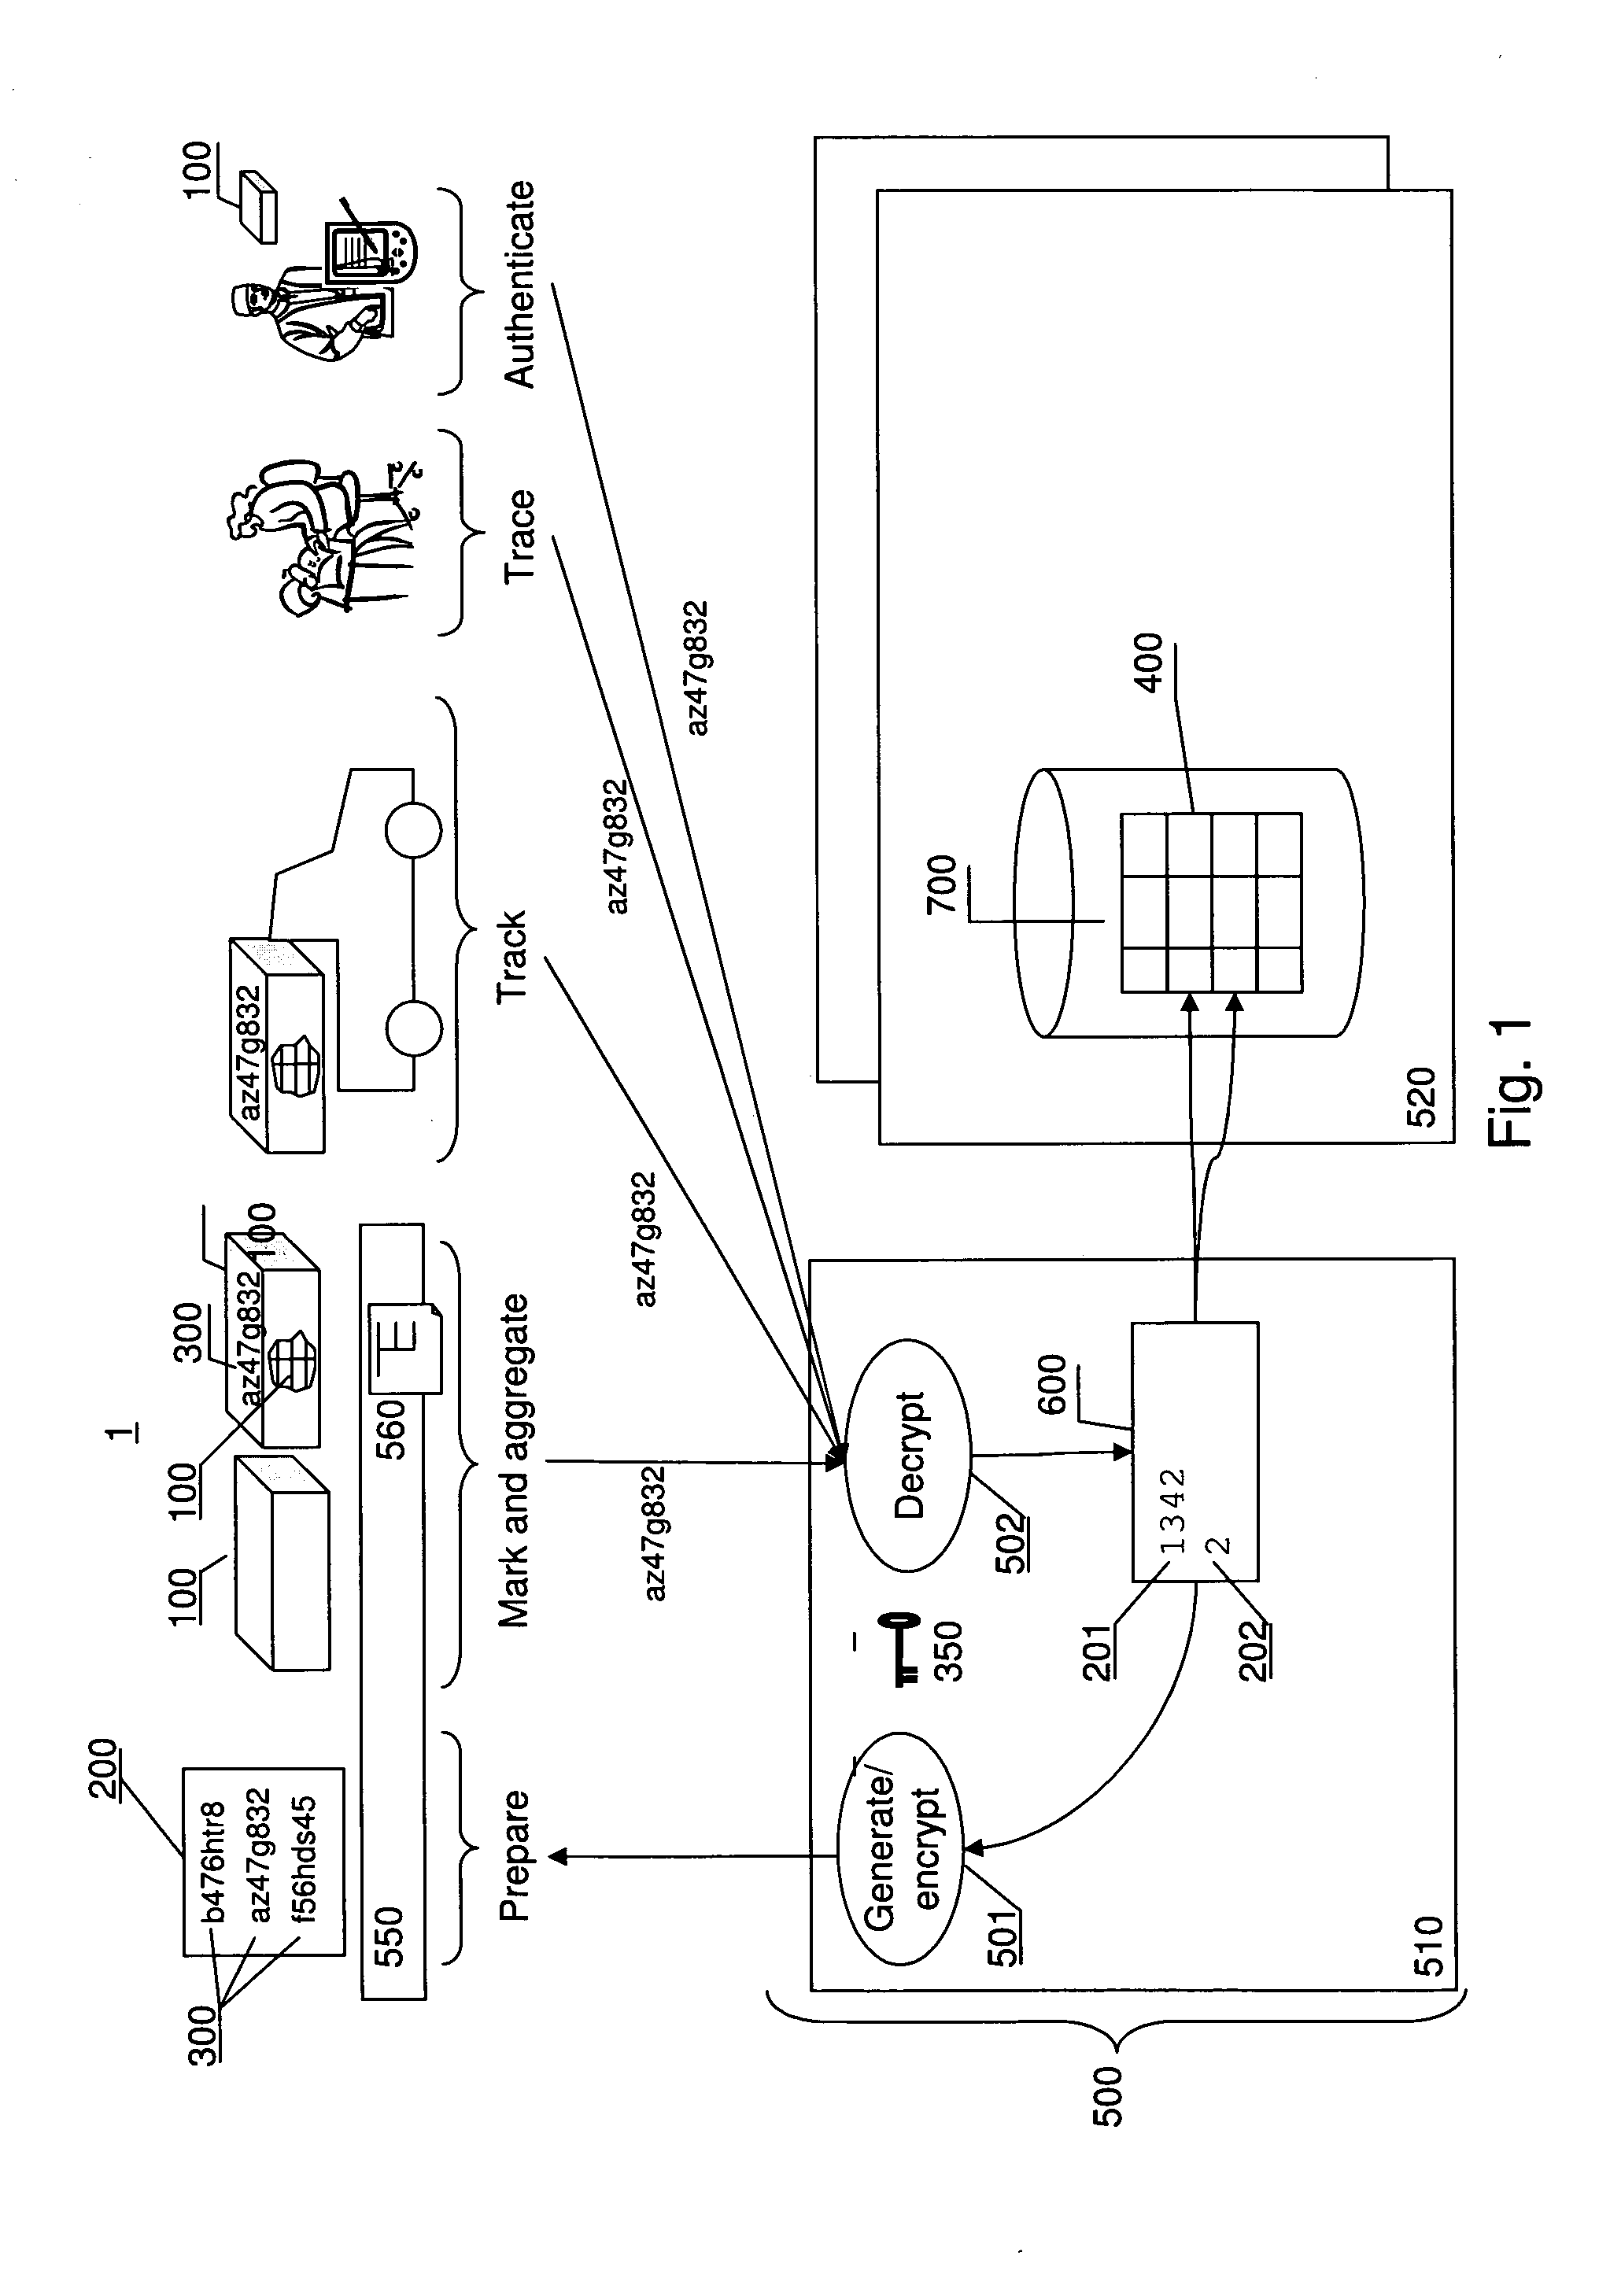 Method and system for storage and retrieval of track and trace information